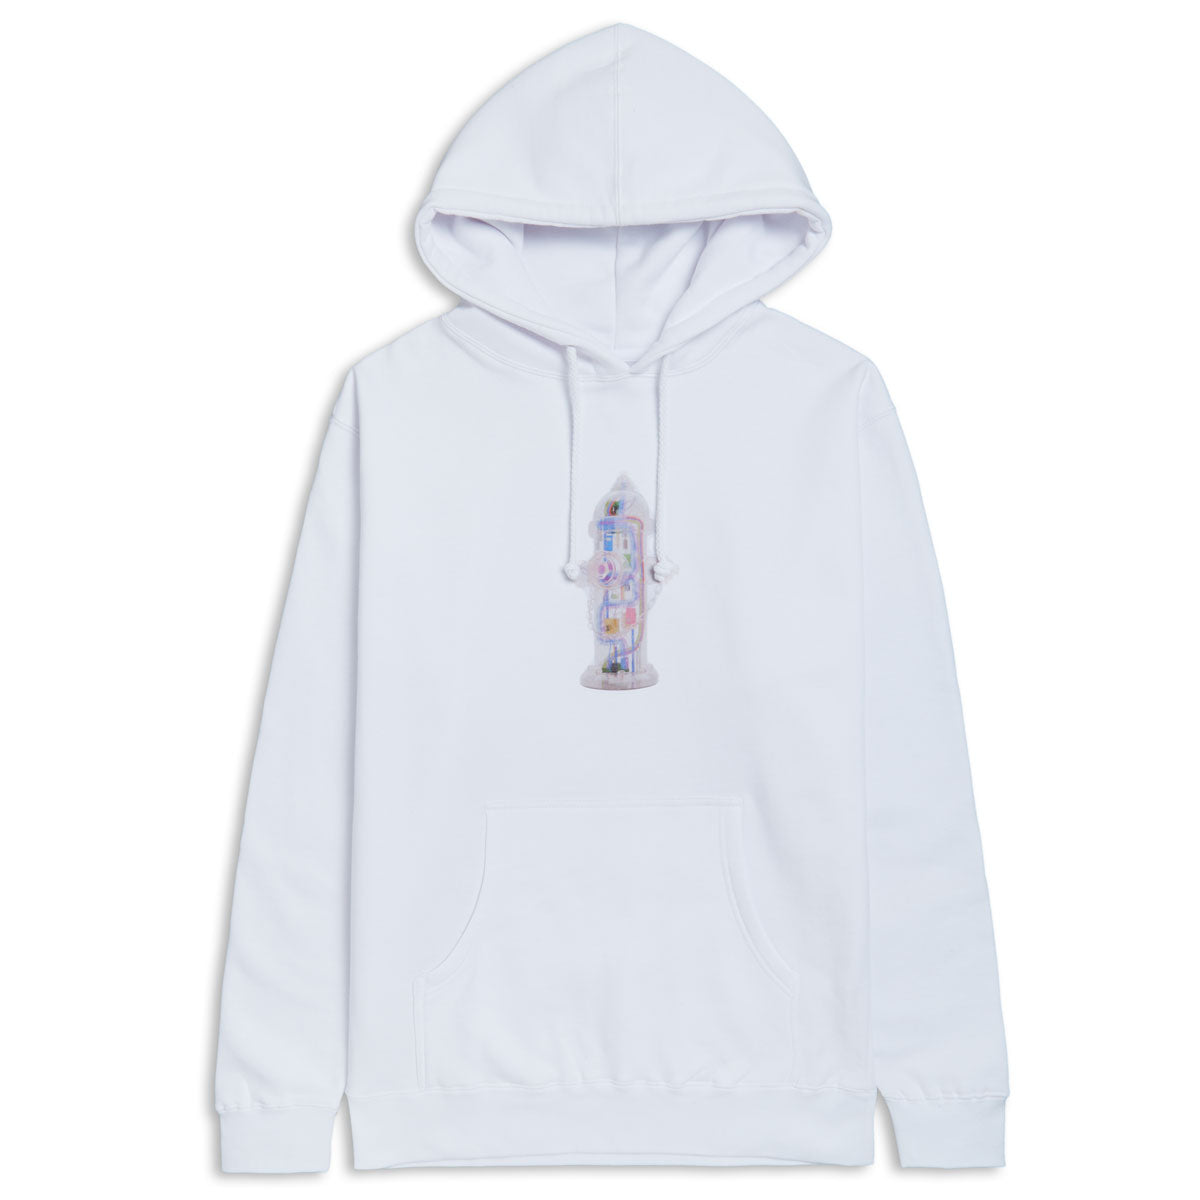 CCS Going Clear Hydrant Hoodie - White image 1